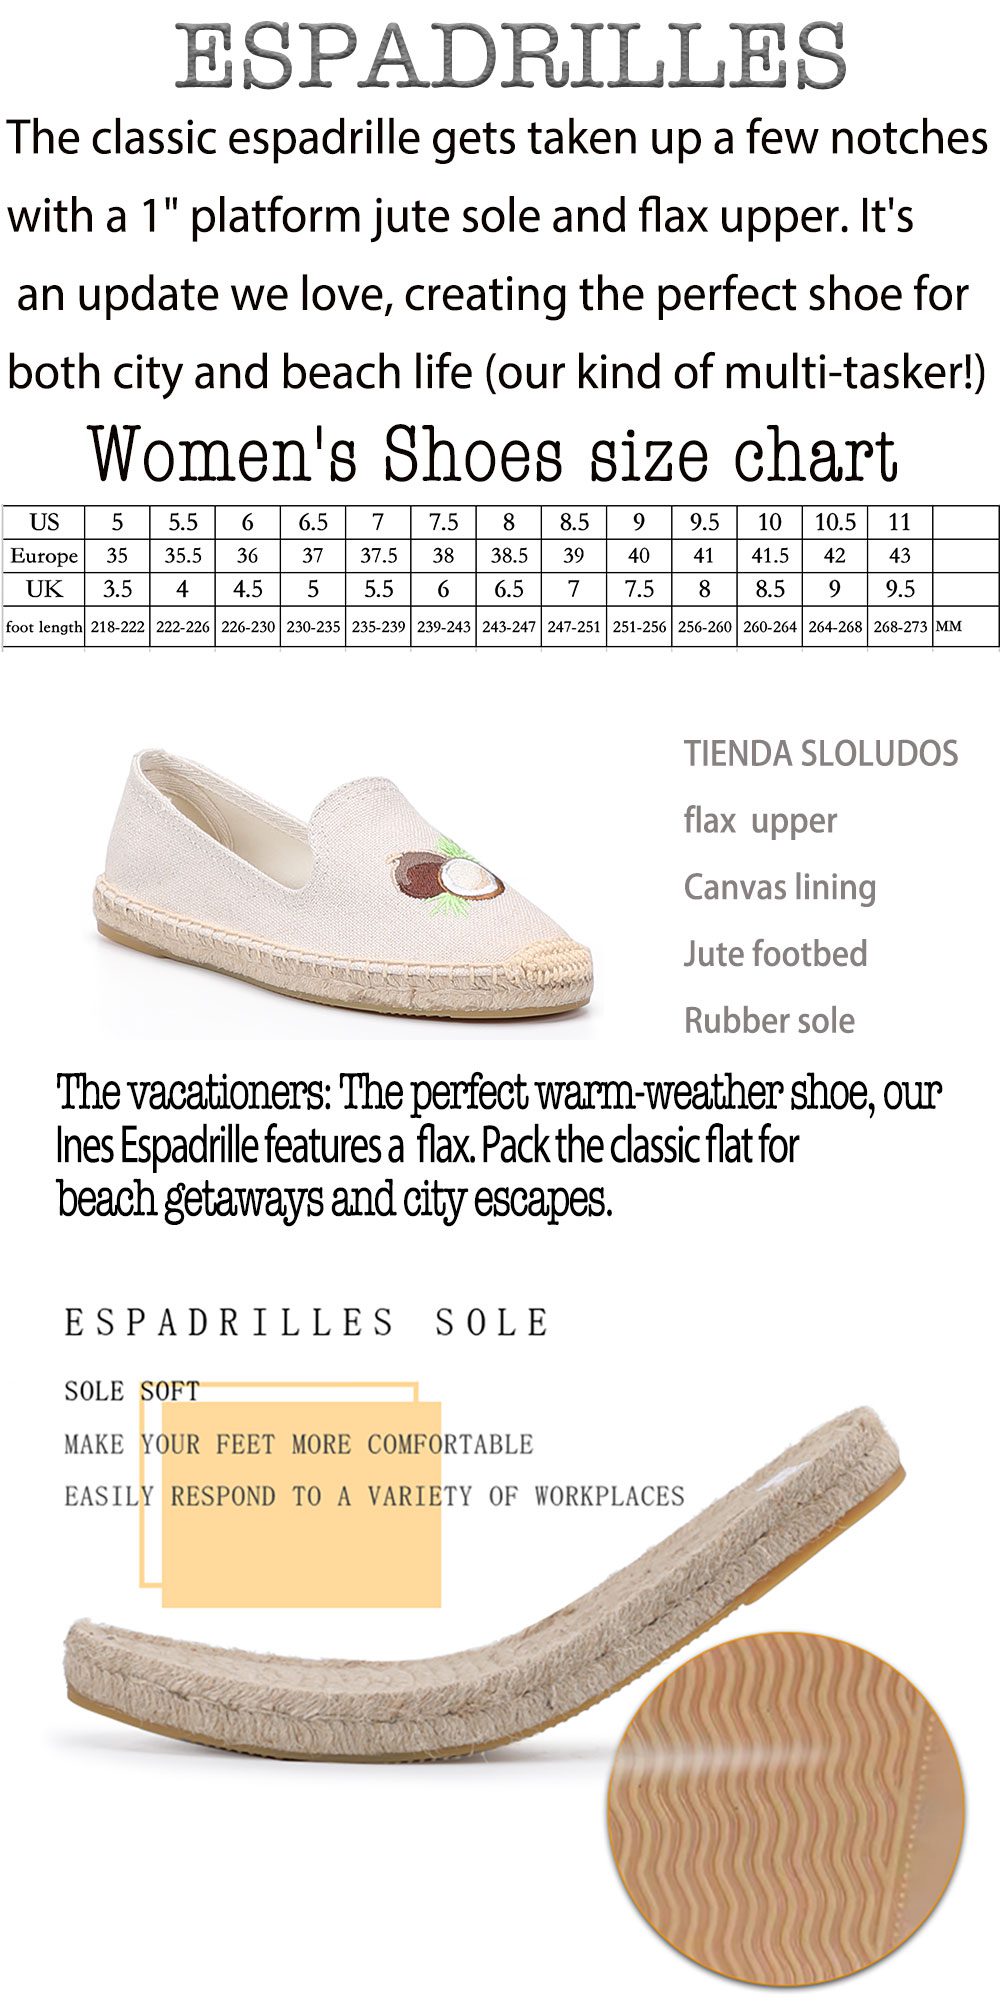 2021 Floral Sapatos Time-limited New Arrival Flat Platform Hemp Rubber Slip-on Casual Zapatillas Mujer Womens Espadrilles Shoes